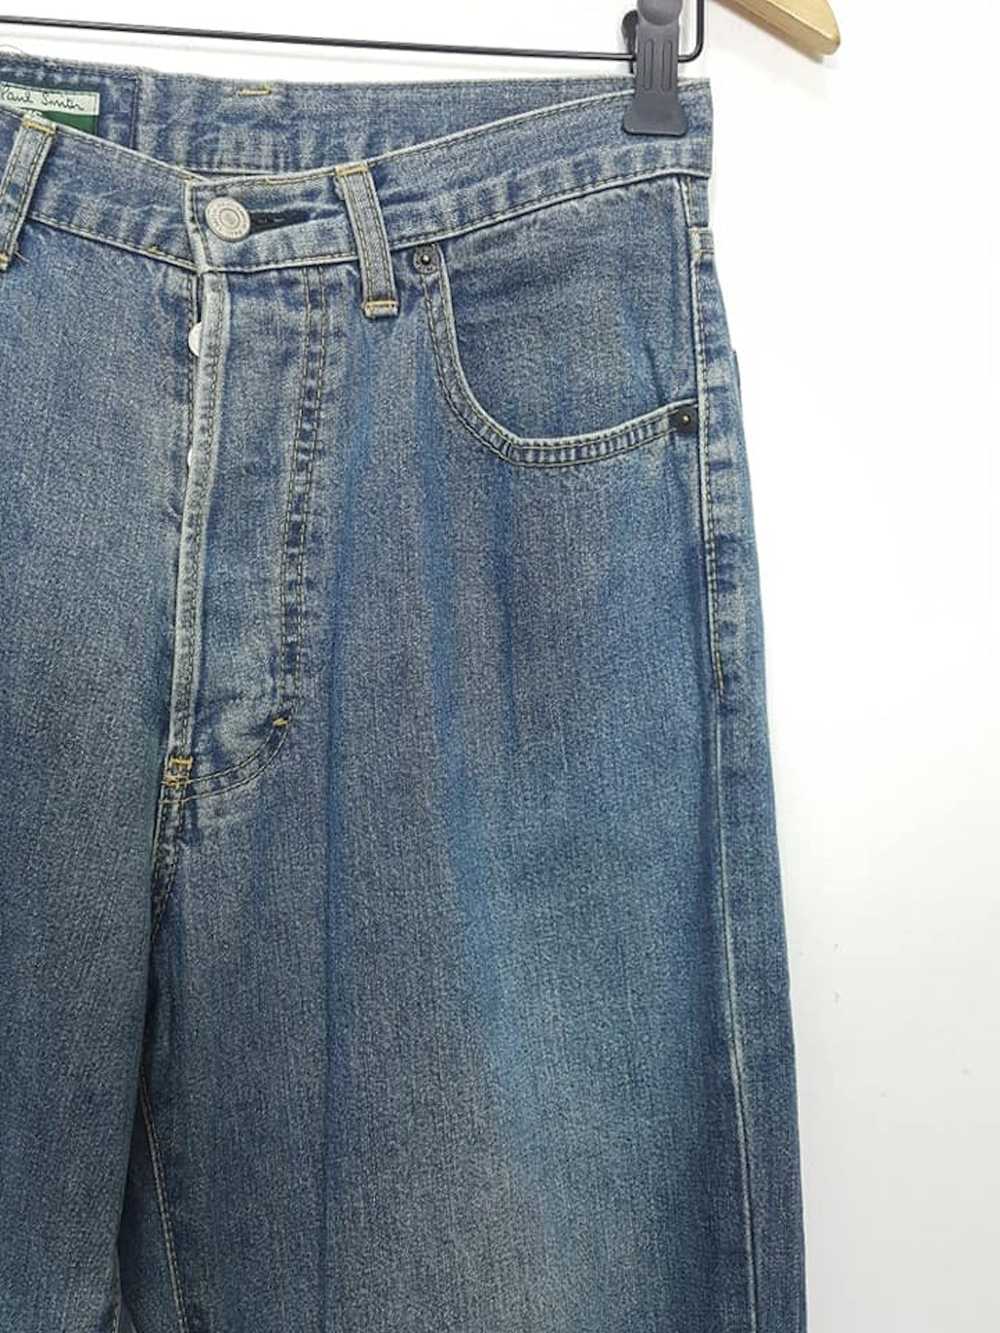 Paul Smith Paul Smith Button Fly Jeans MADE IN JA… - image 4